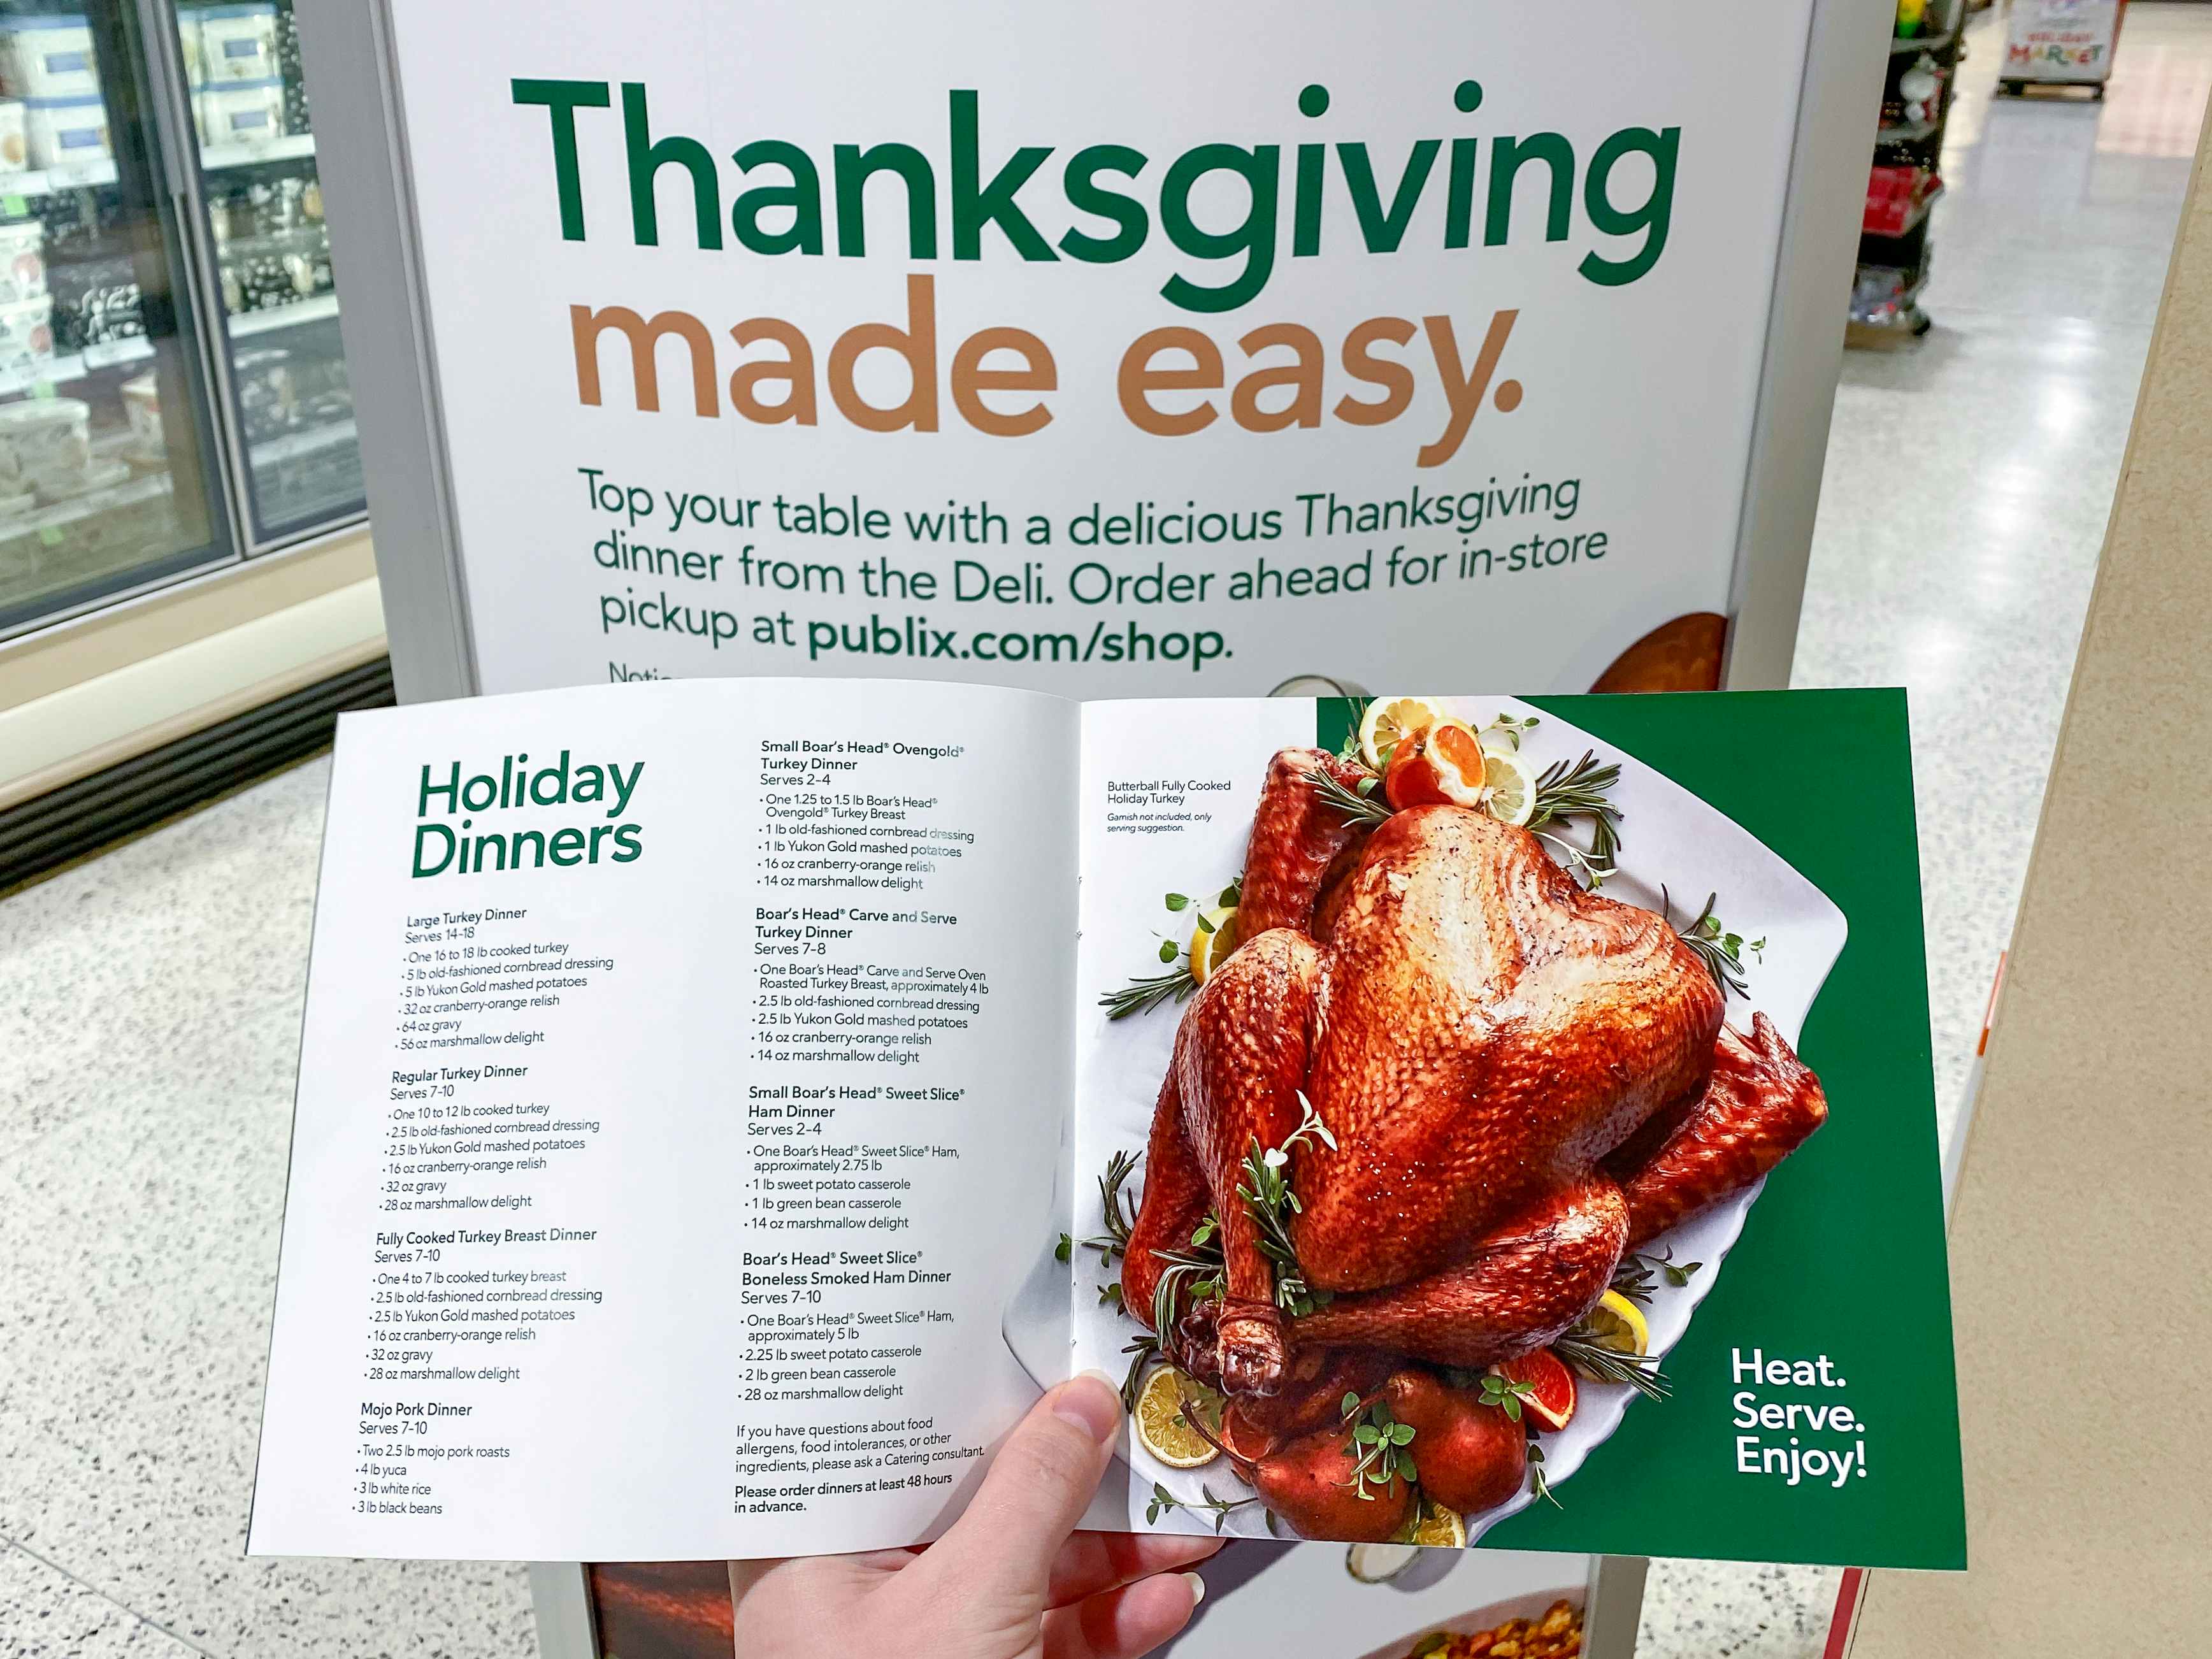 A person holding a booklet listing the Publix holiday dinner choices in front of a sign inside Publix that says, "Thanksgiving made easy....